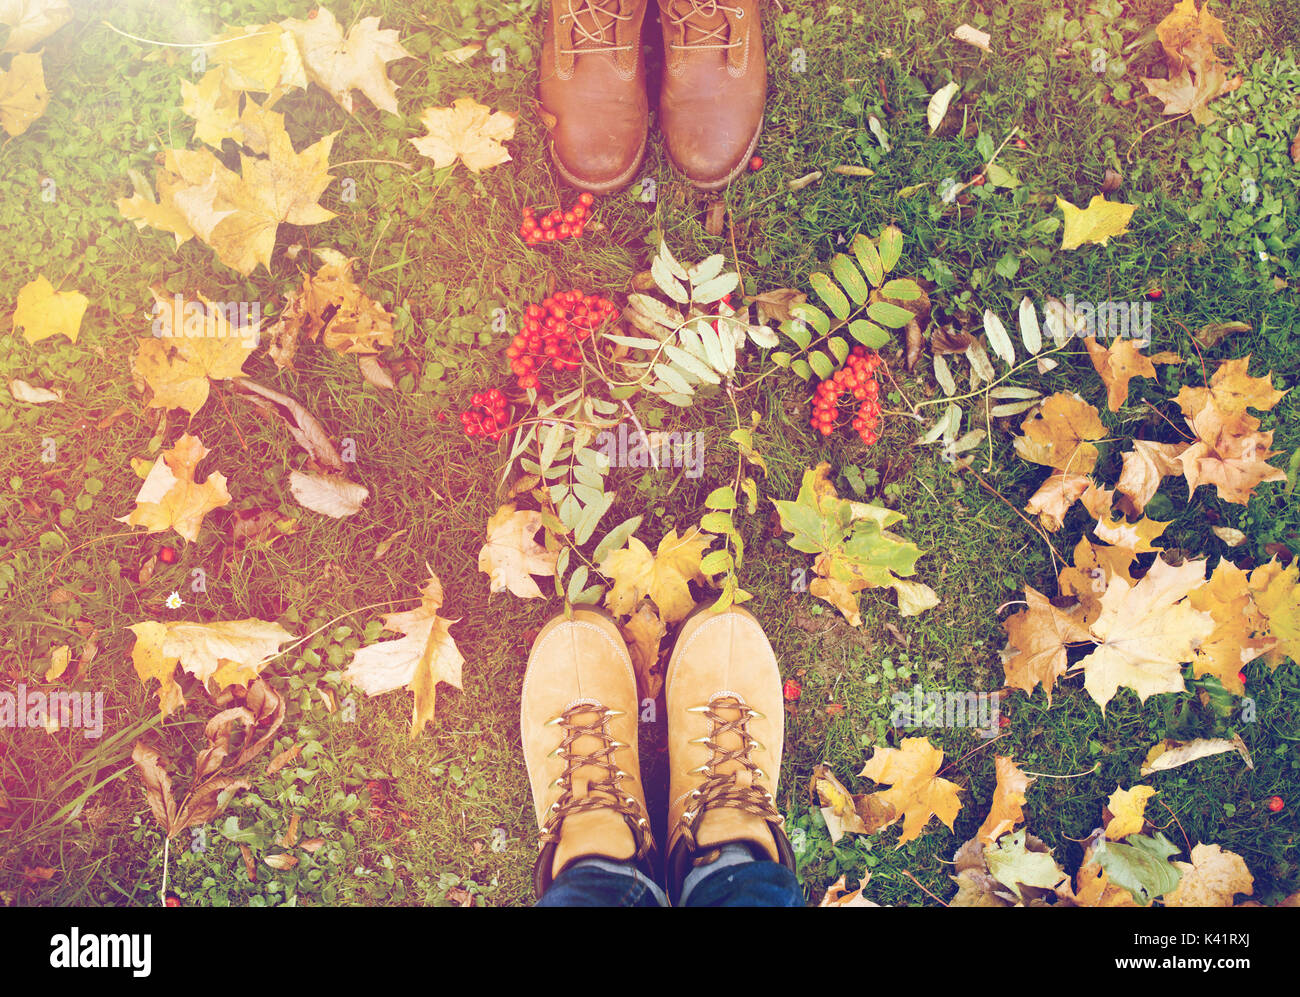 feet in boots with rowanberries and autumn leaves Stock Photo